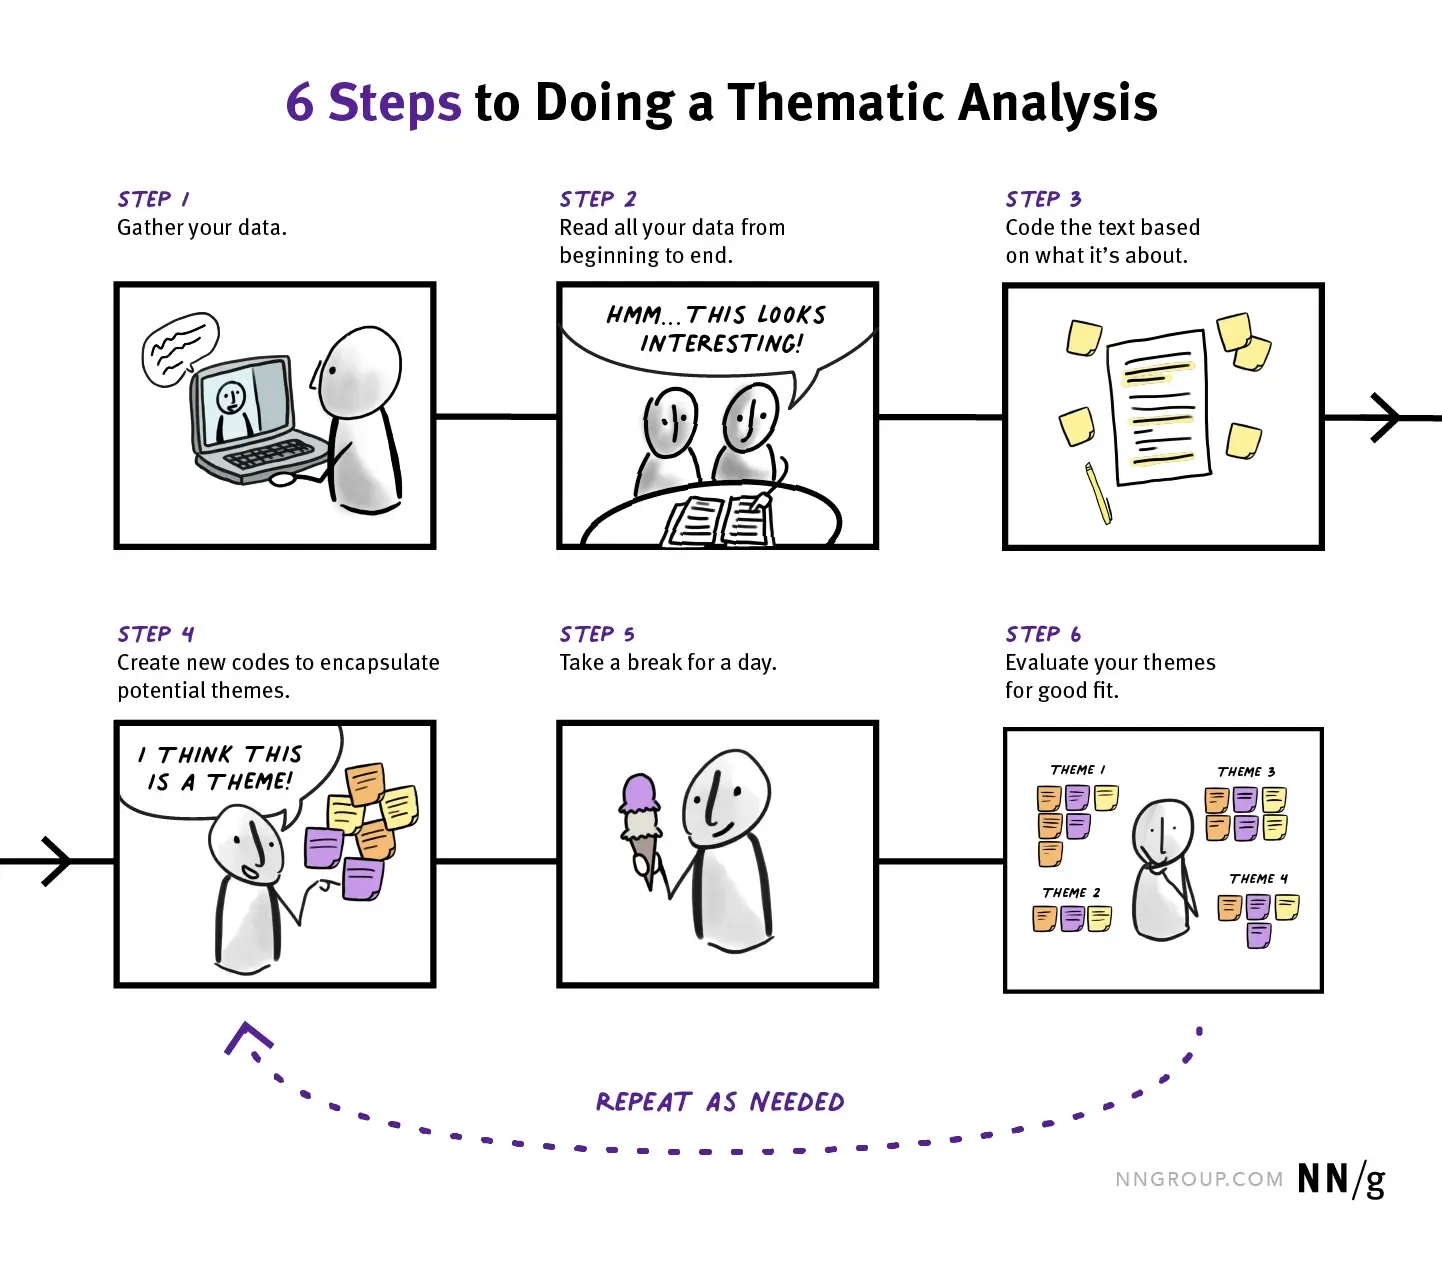 6 steps to doing a thematic analysis